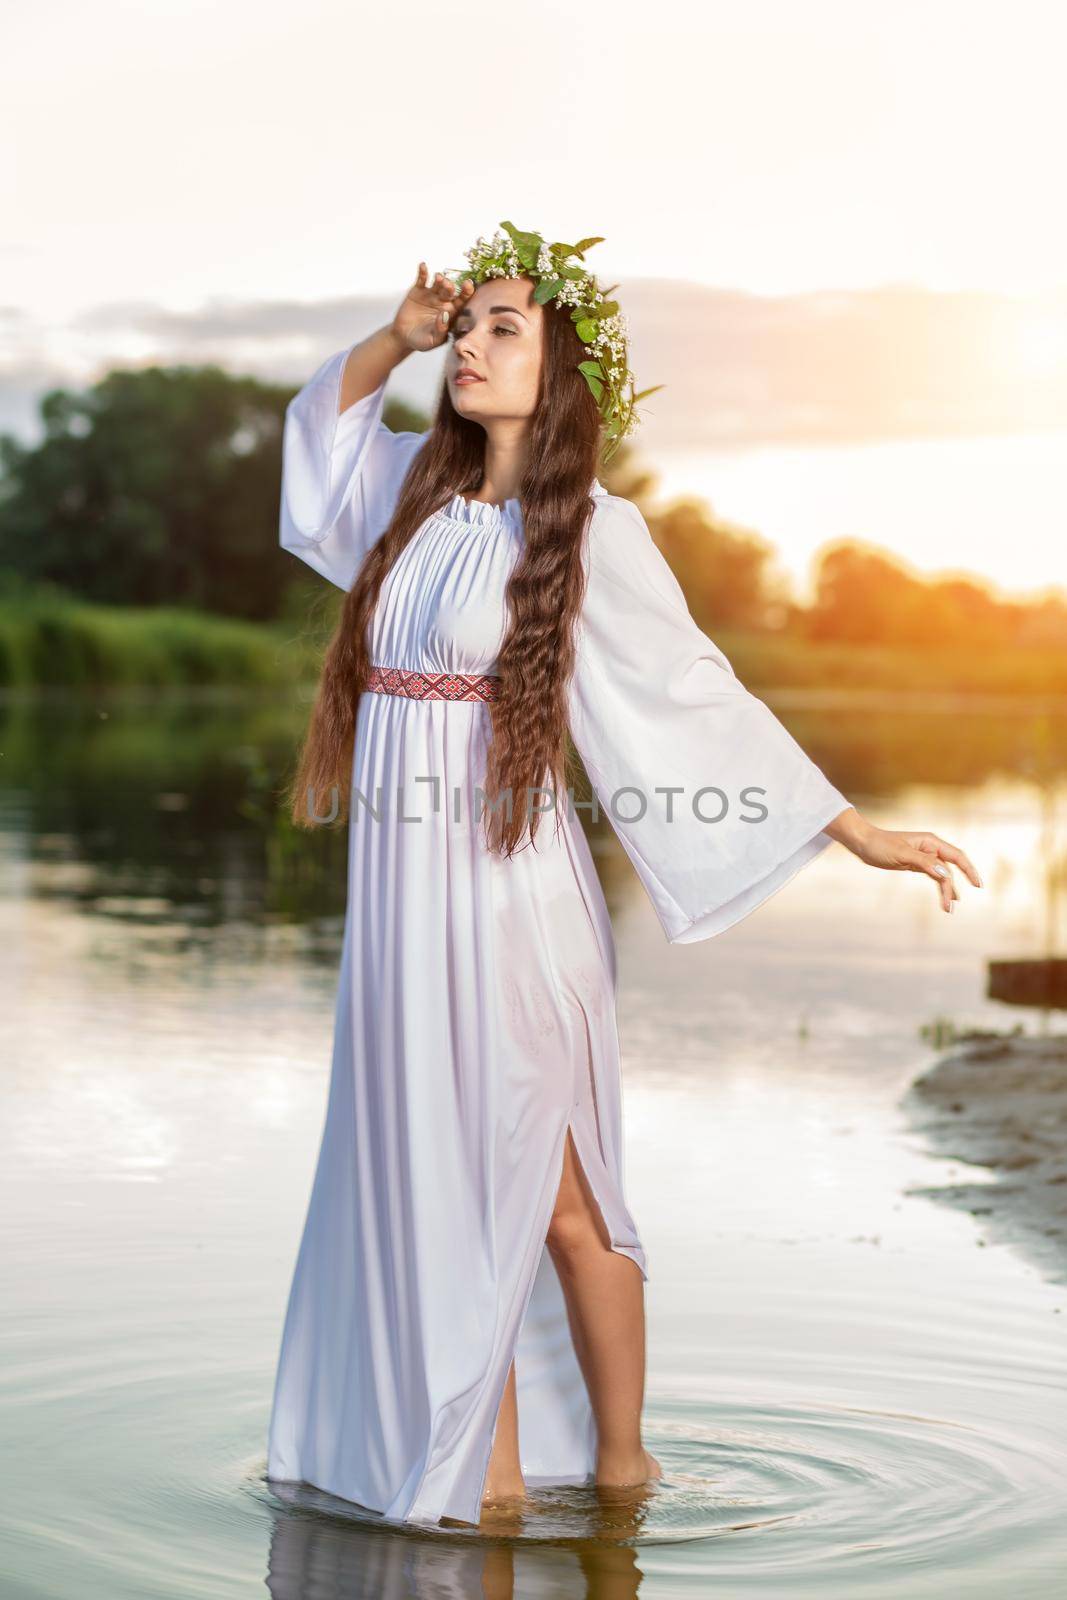 Beautiful black haired girl in white vintage dress and wreath of flowers standing in water of lake. Sun flare. by nazarovsergey